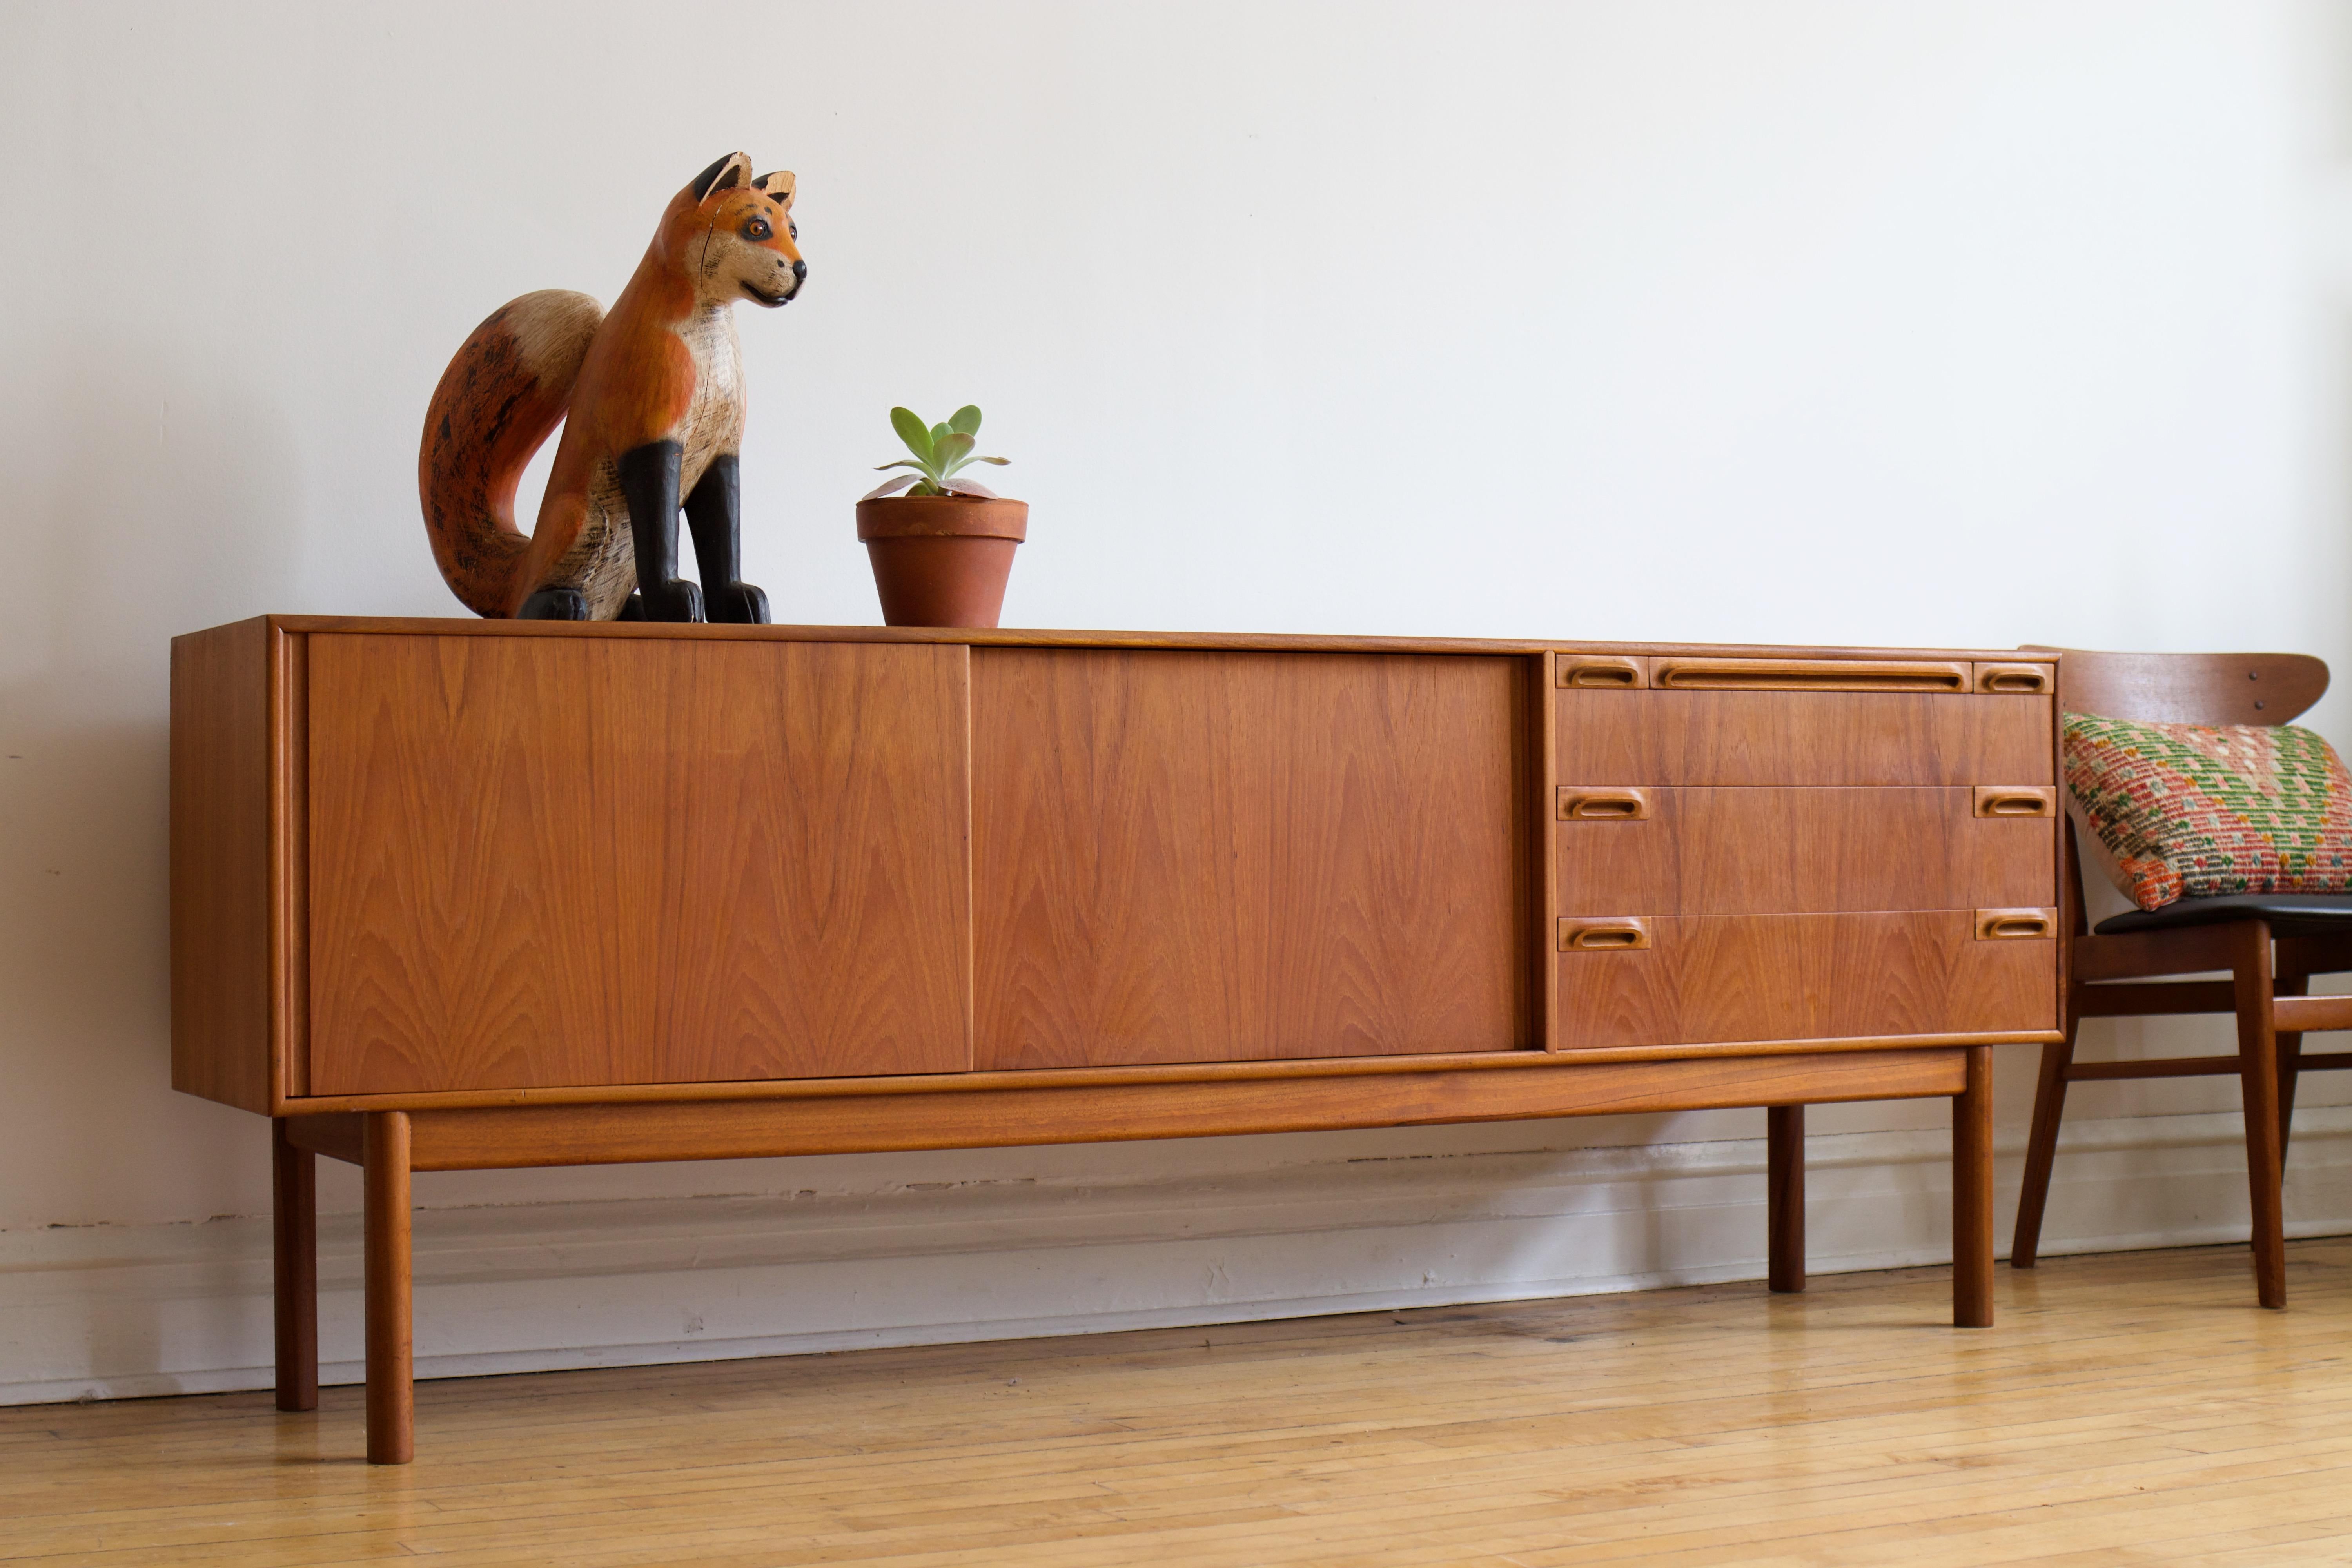 Extra long Mid-century Modern teakwood sideboard.
Made in Scotland by McIntosh.
Just imported from England to Chicago.
Gorgeous teak wood grain and uniquely carved pulls.
Three drawers; top drawer holds dividers.
Black laminated tray extends for